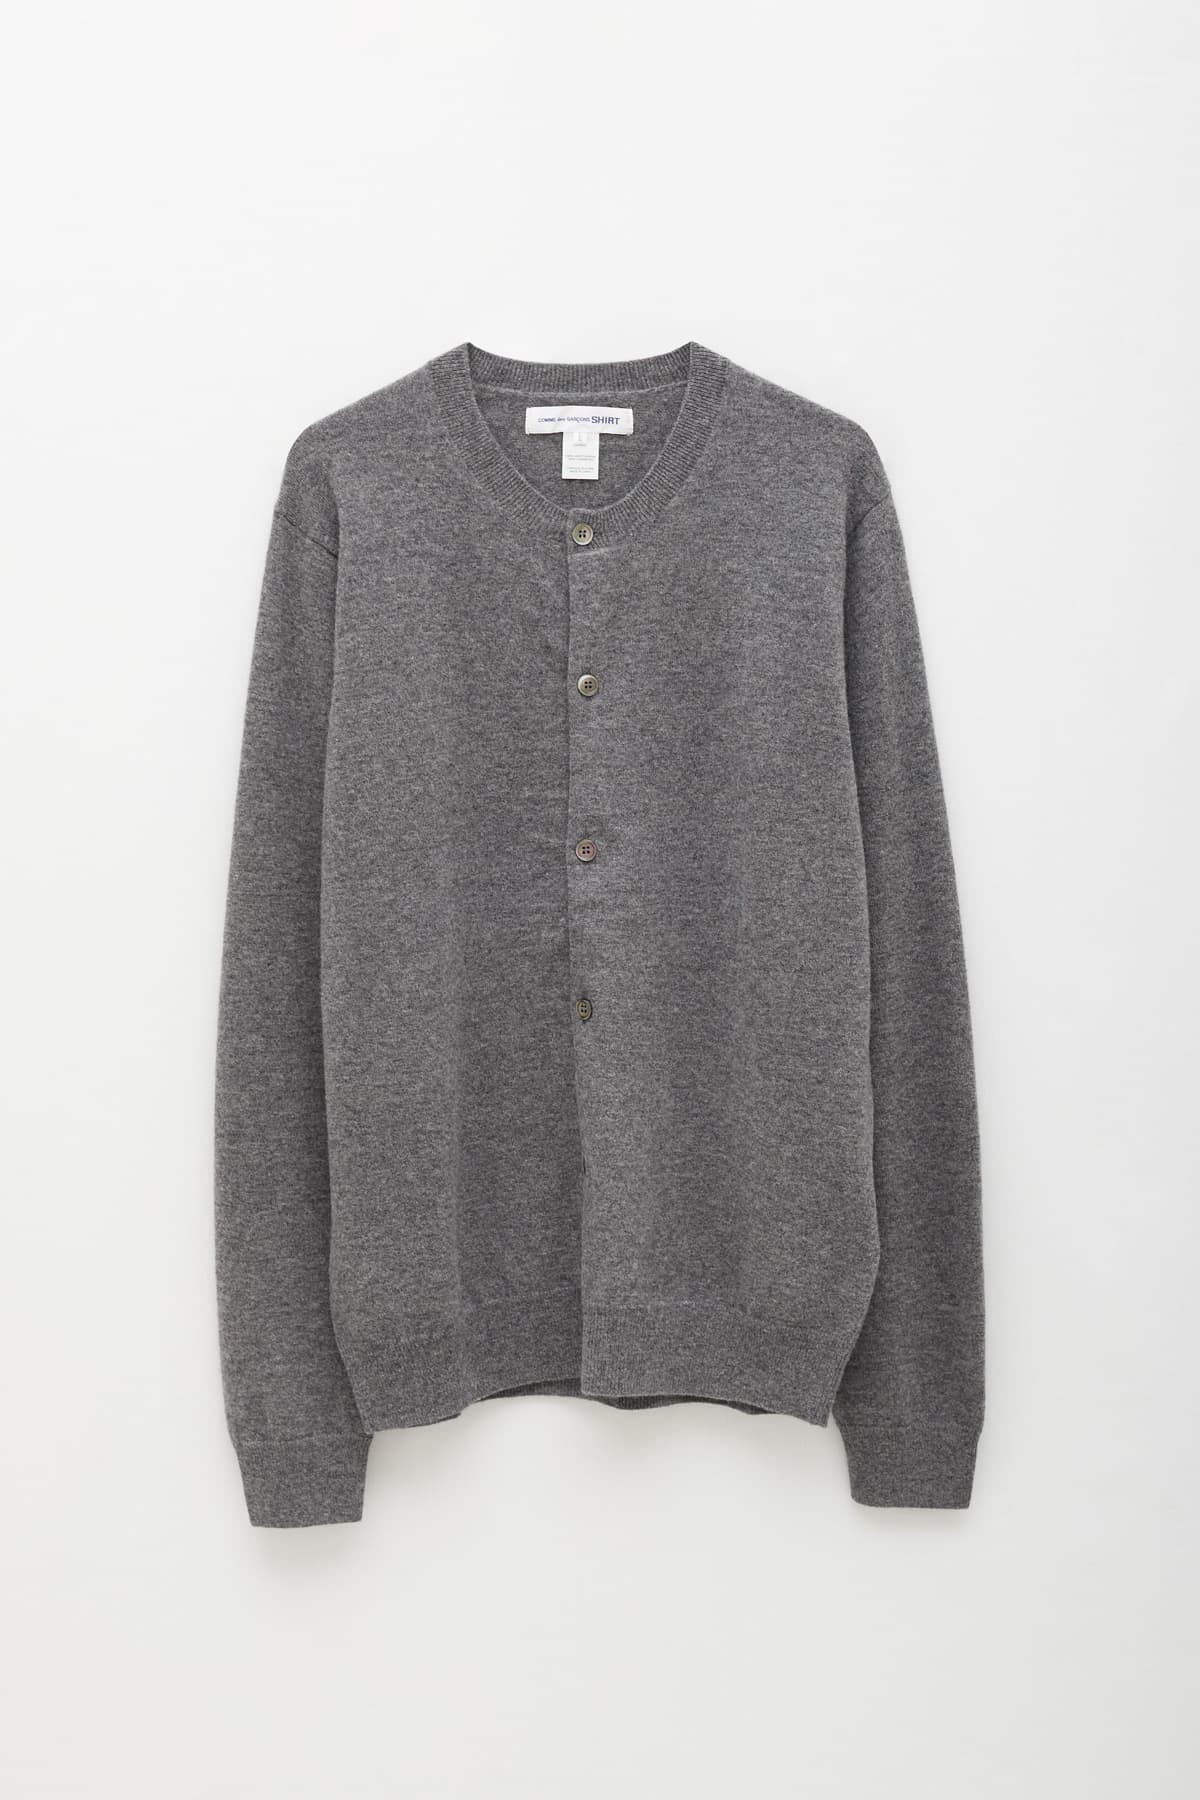 COMME DES GARCONS SHIRT FOREVER TOP GREY ROUND CARDIGAN IAMNUE